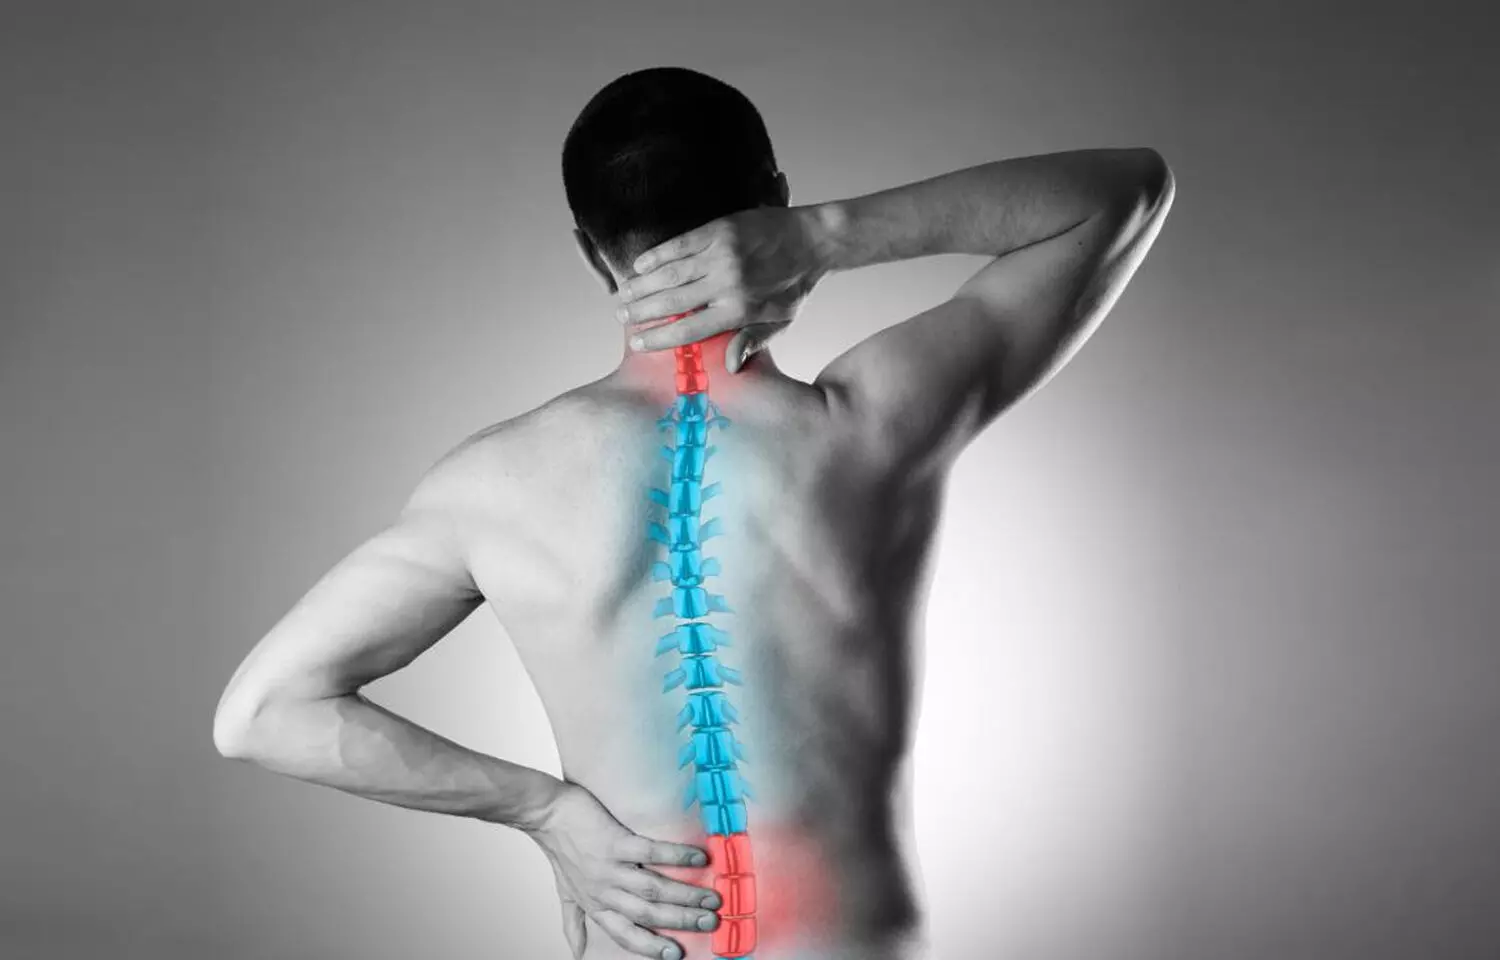 Methadone and ketamine combo effective for pain control after spinal surgery: Study